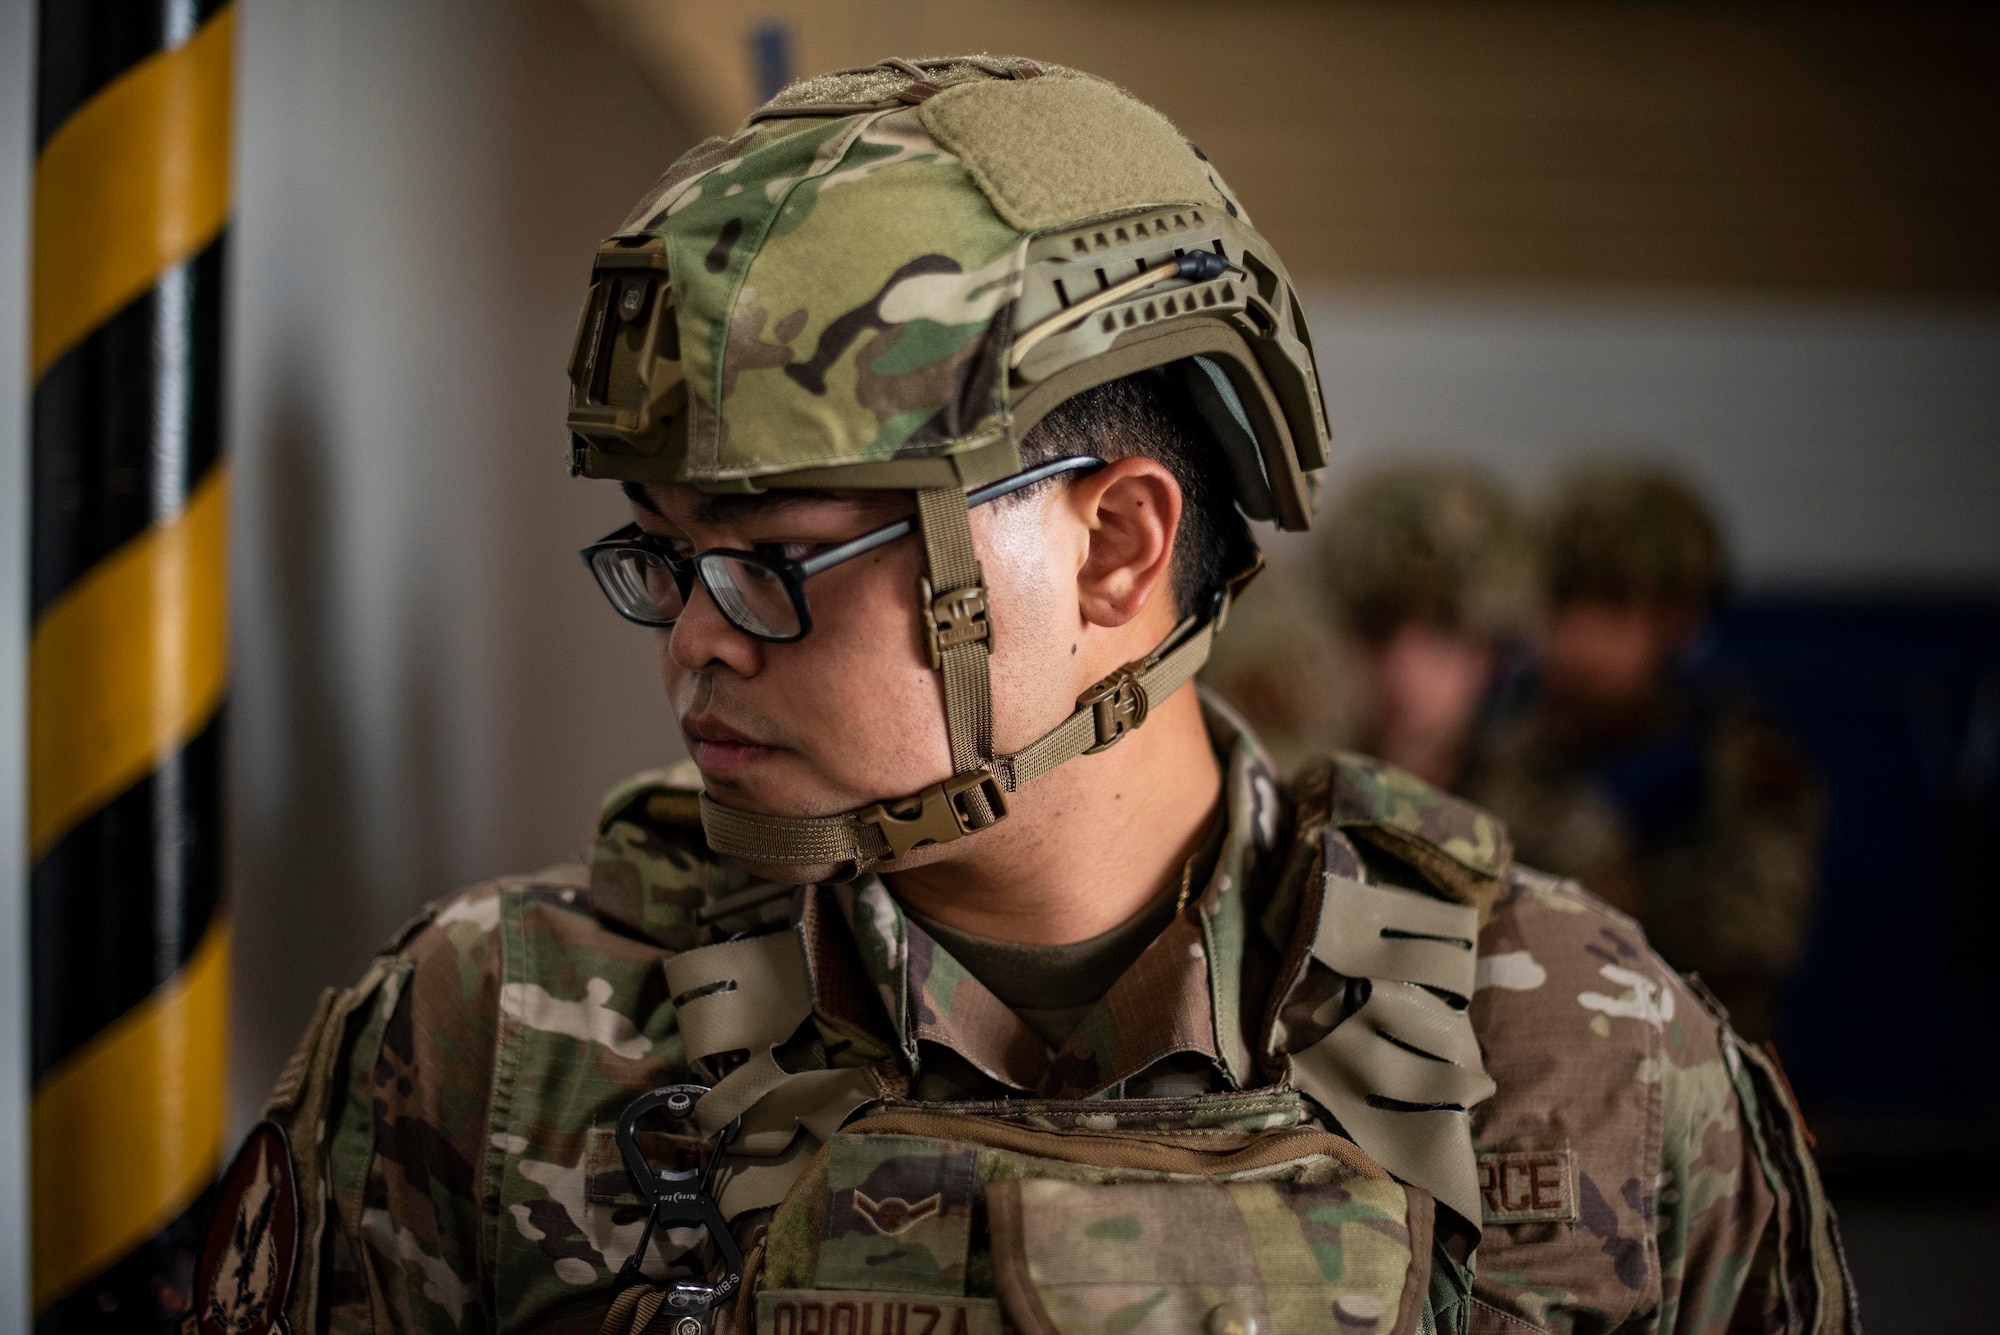 Unified Weapons Master tests second-gen combat armor in